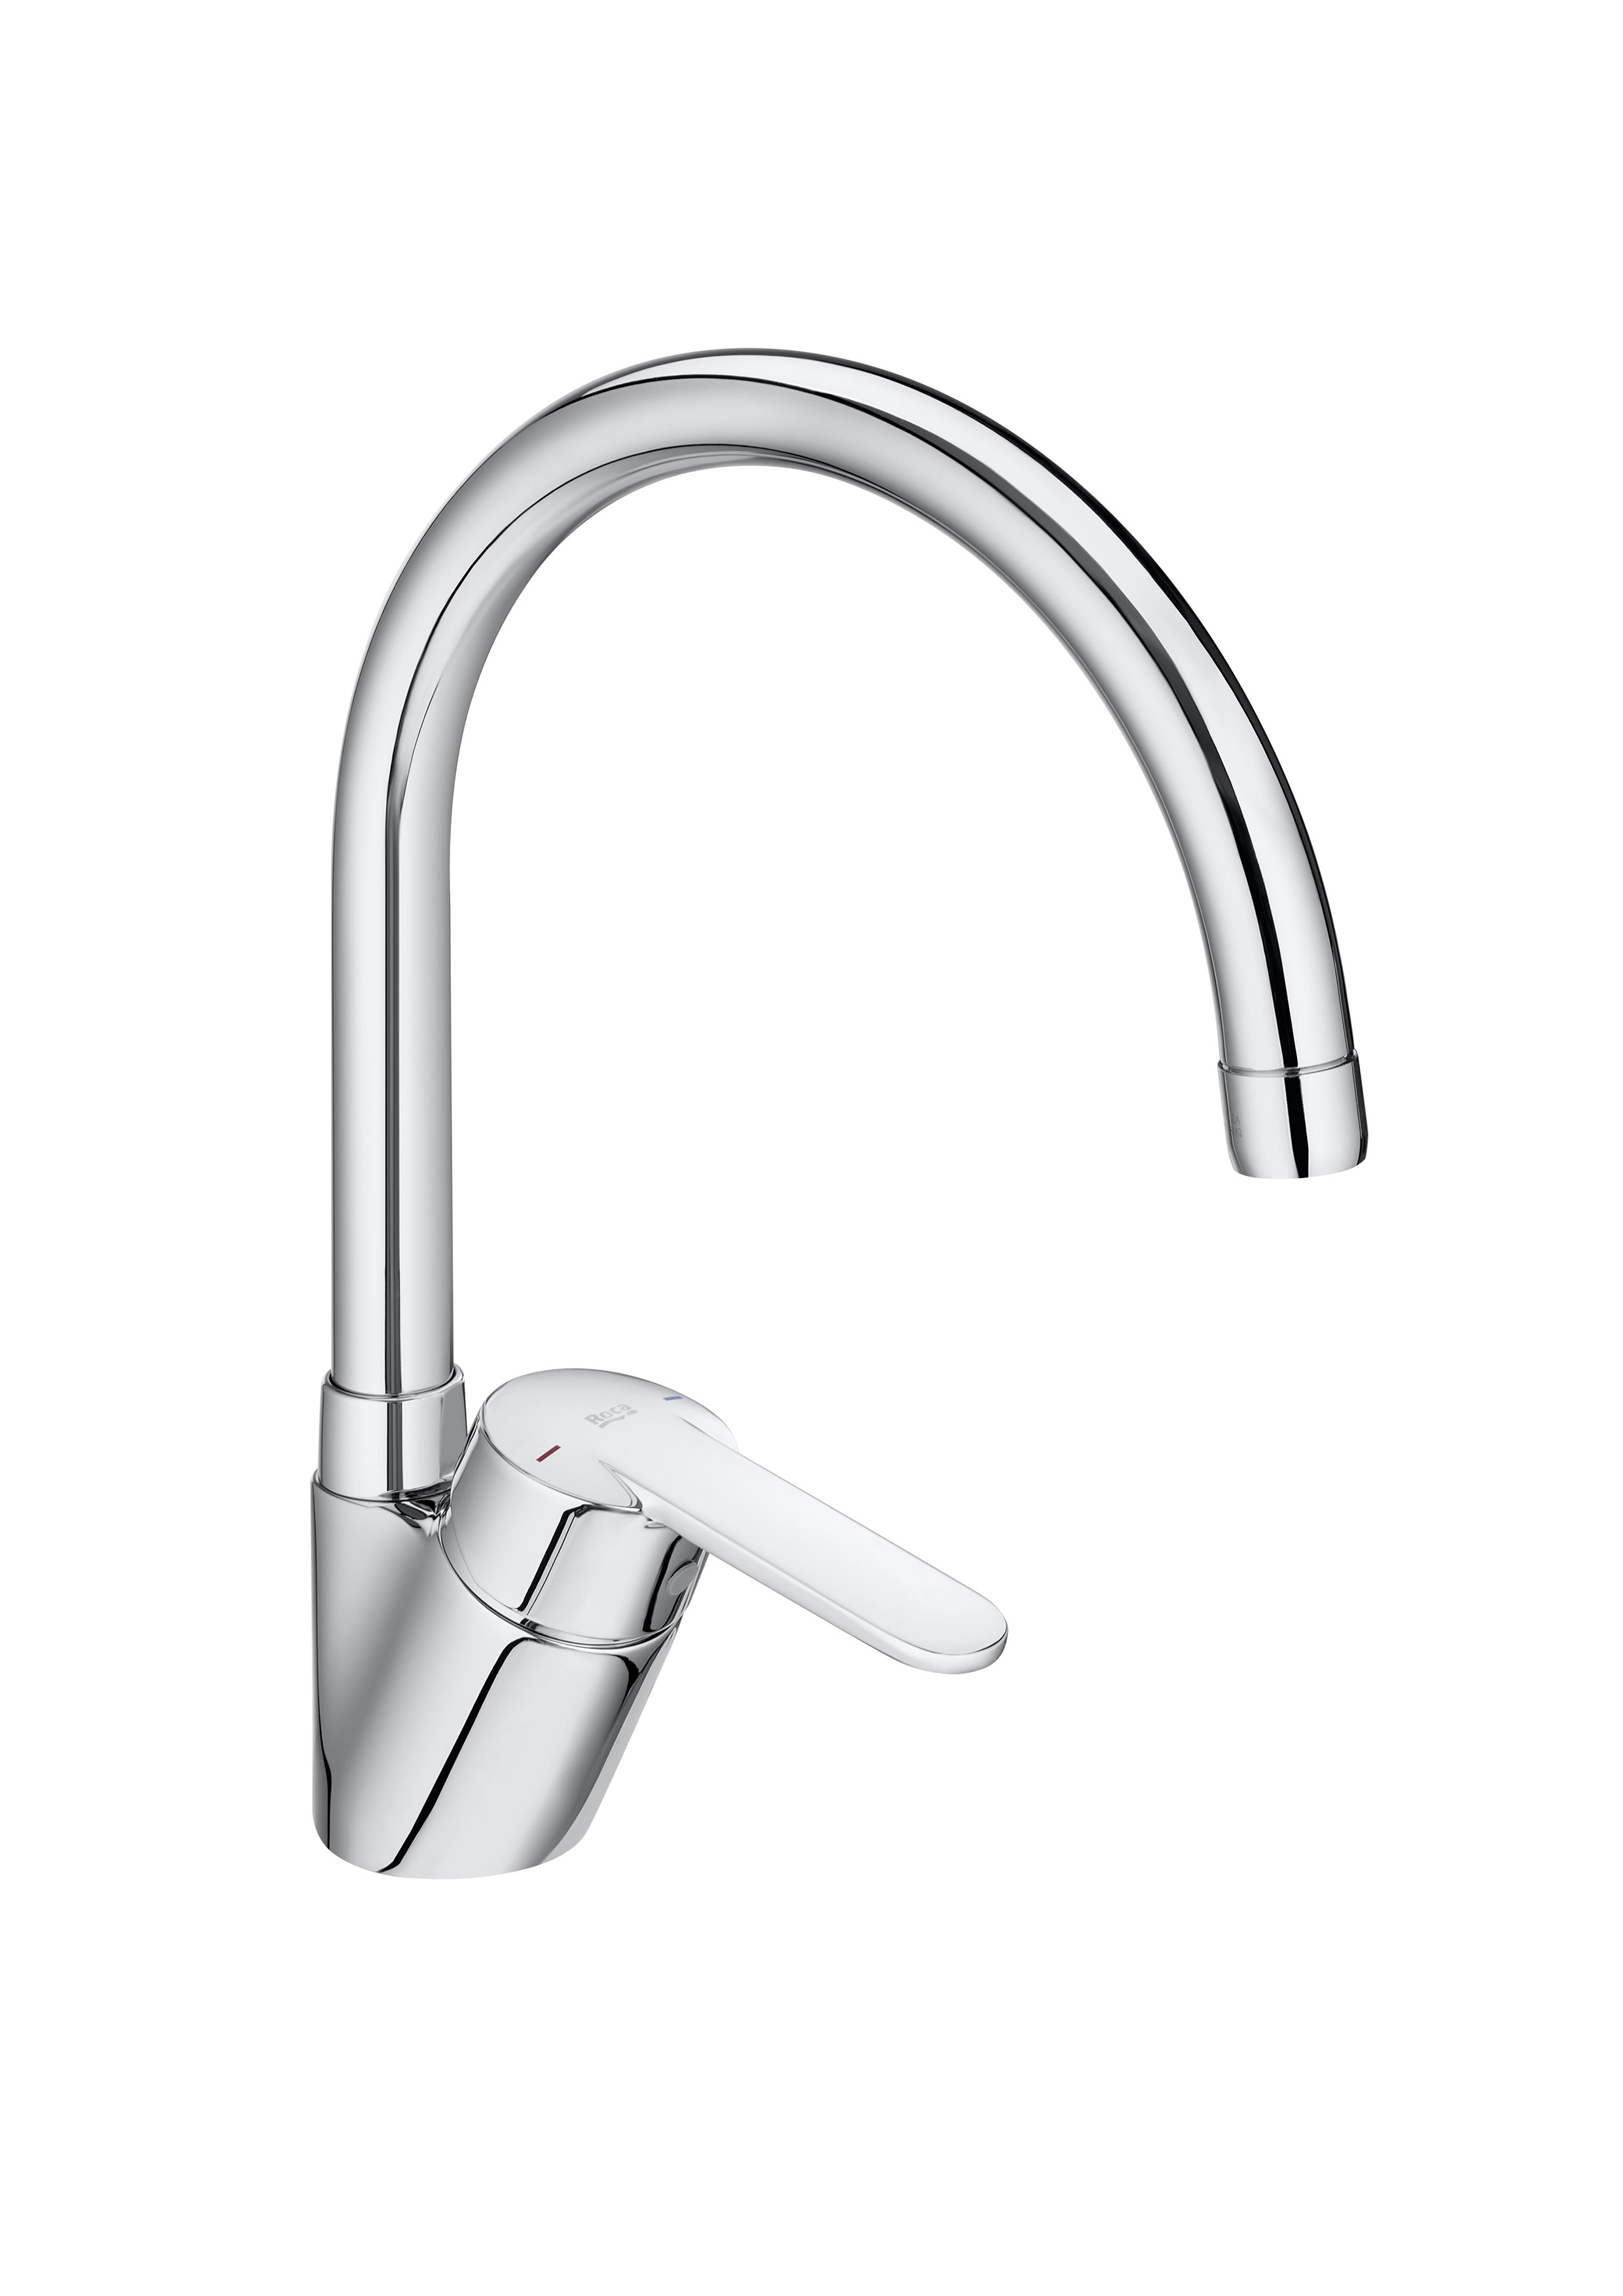 Kitchen sink mixer with swivel spout